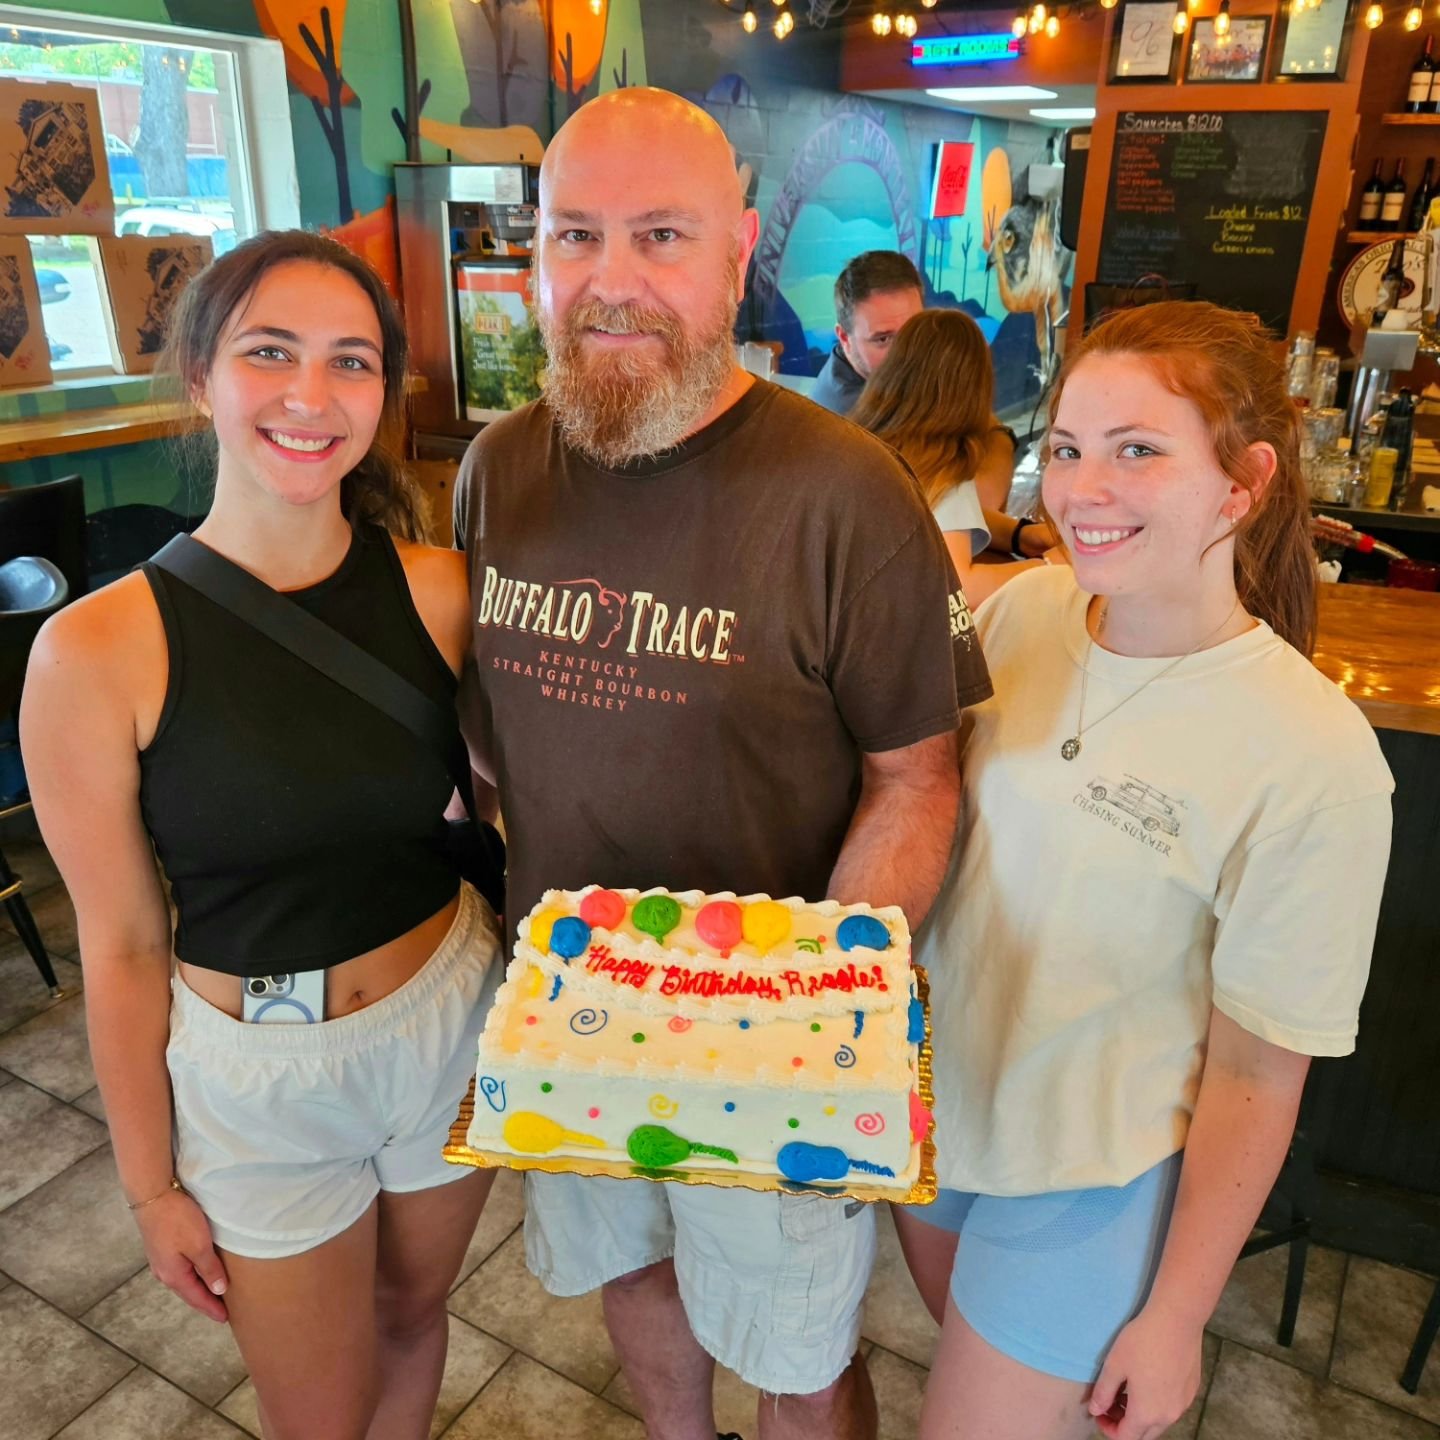 Help us wish the happiest of birthdays to our Montevallo GM, Reggie! He has been a part of the Slice Family for many years, and his daughters work with us as well! It's truly a family affair at Slice! ❤️

Reggie, we appreciate everything you do for u